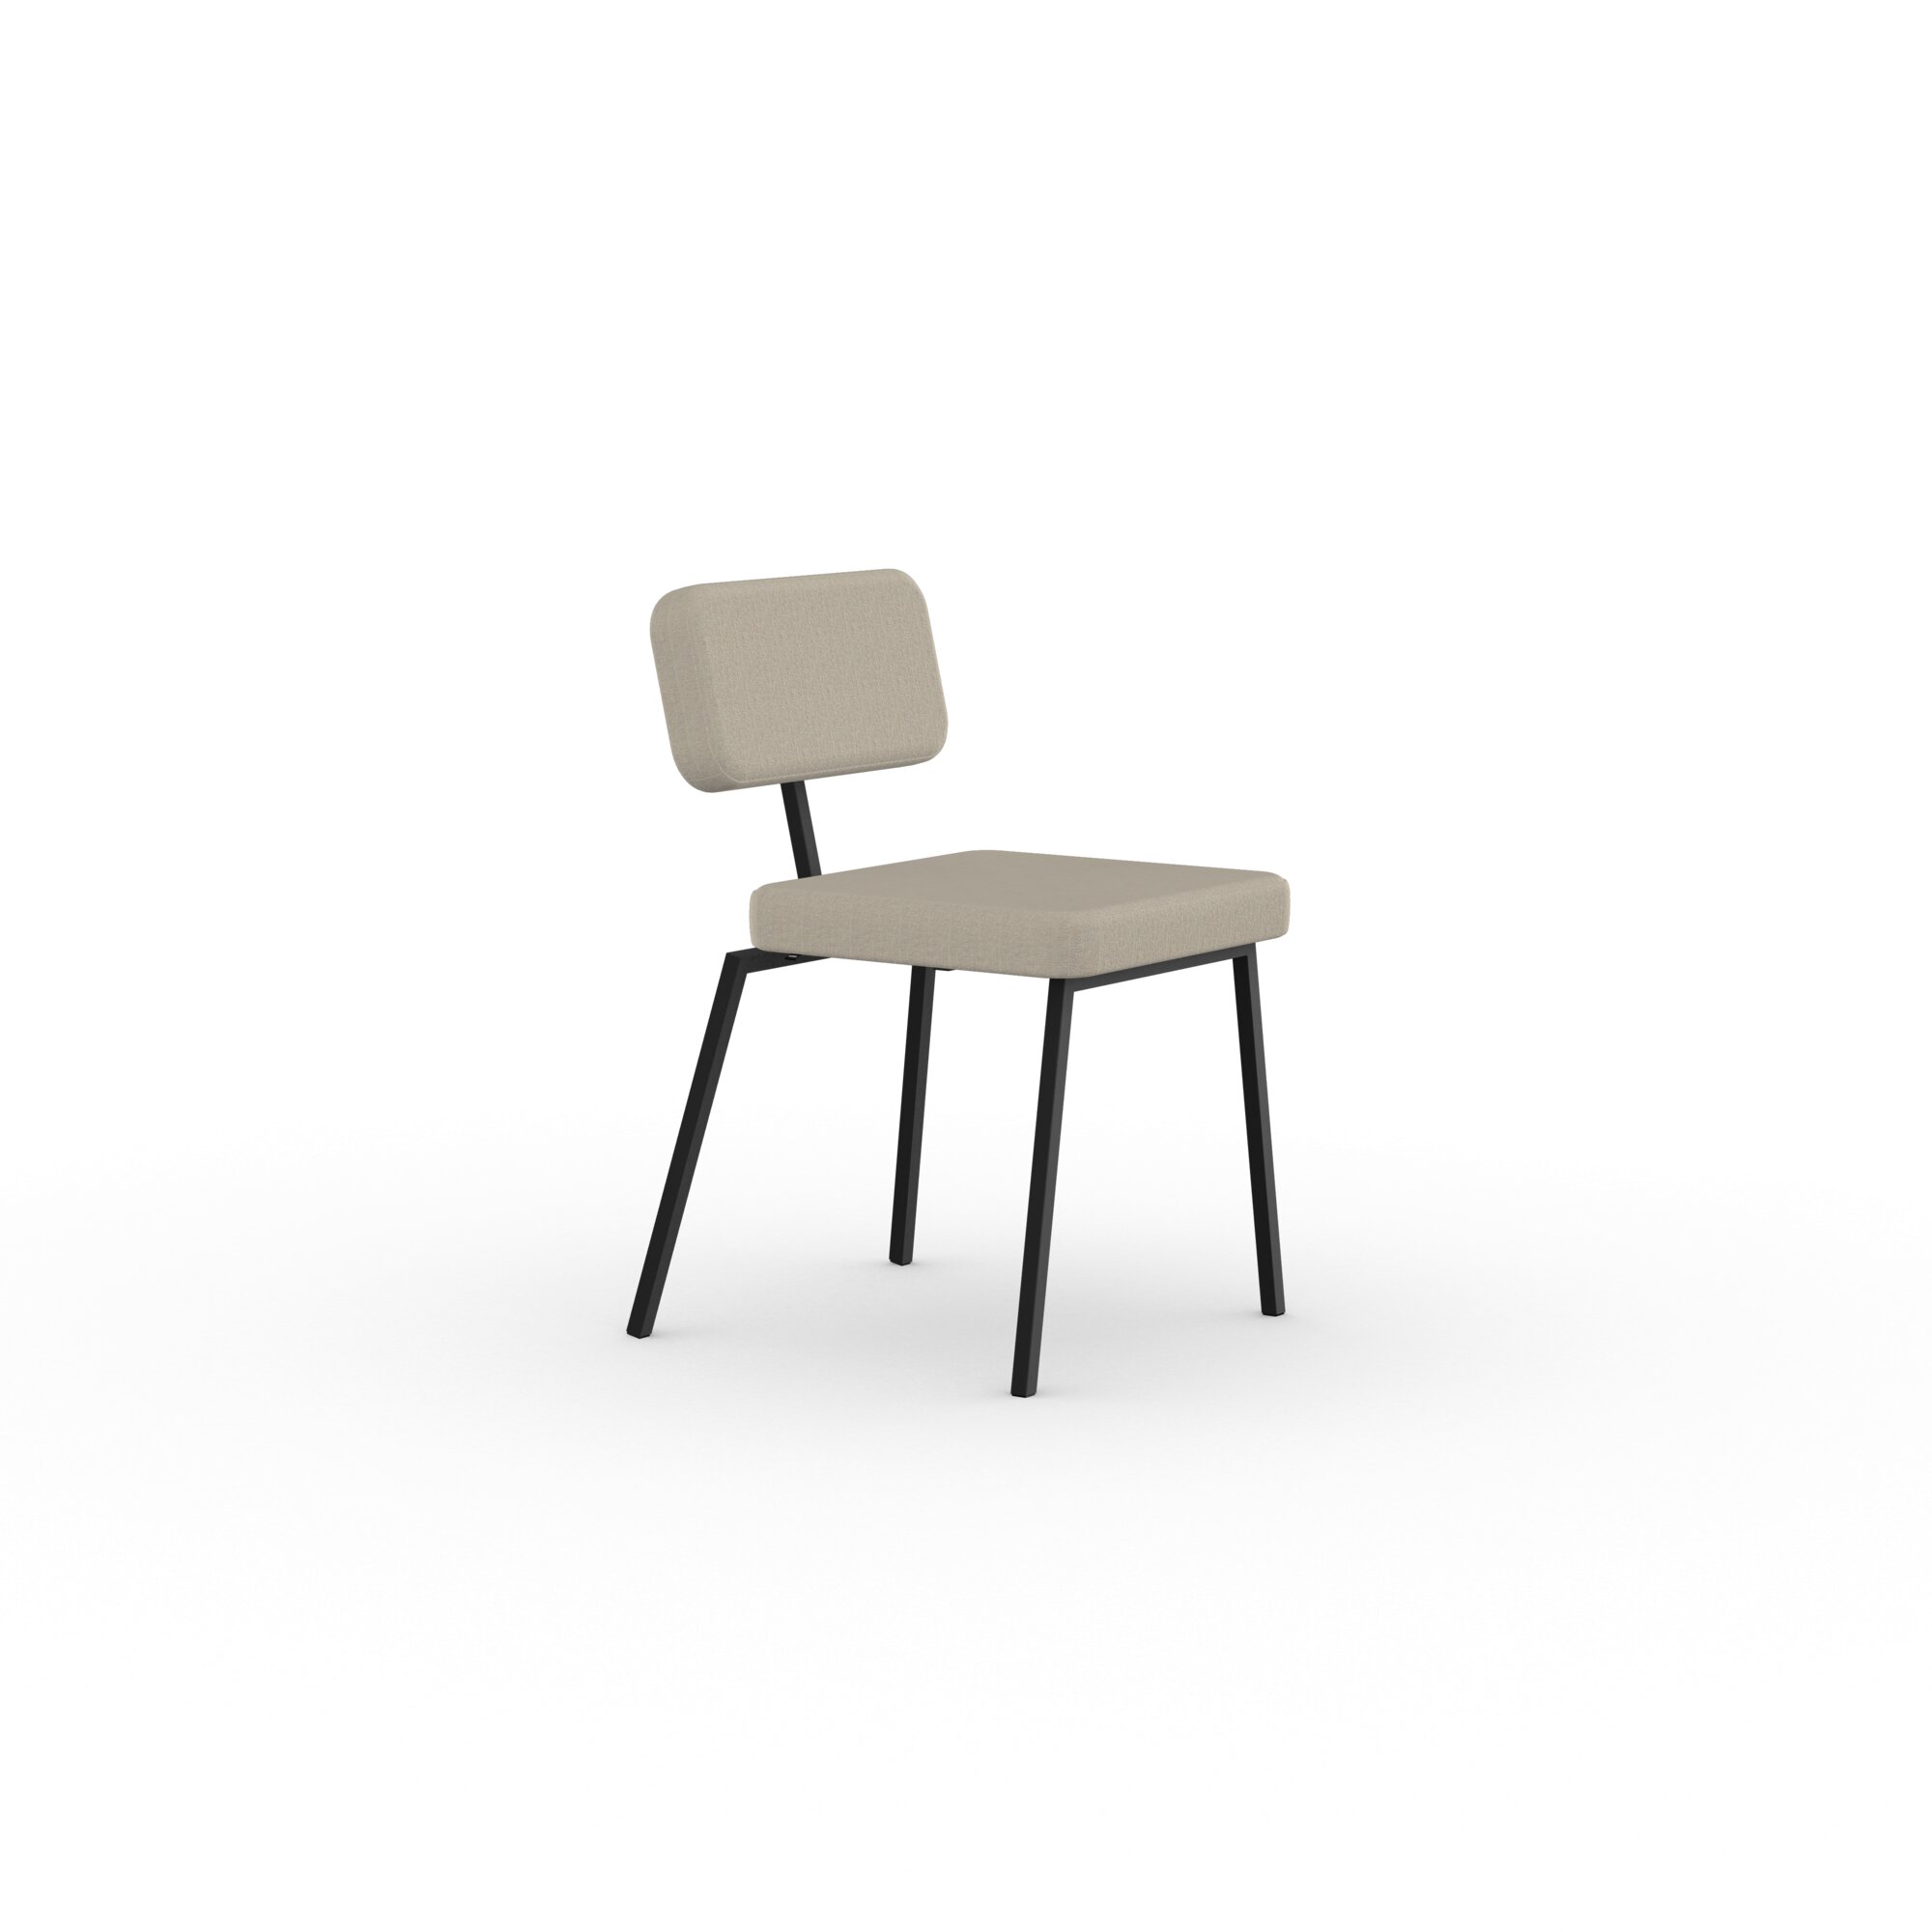 Design modern dining chair | Ode Chair without armrest Beige soil natural01 | Studio HENK| 